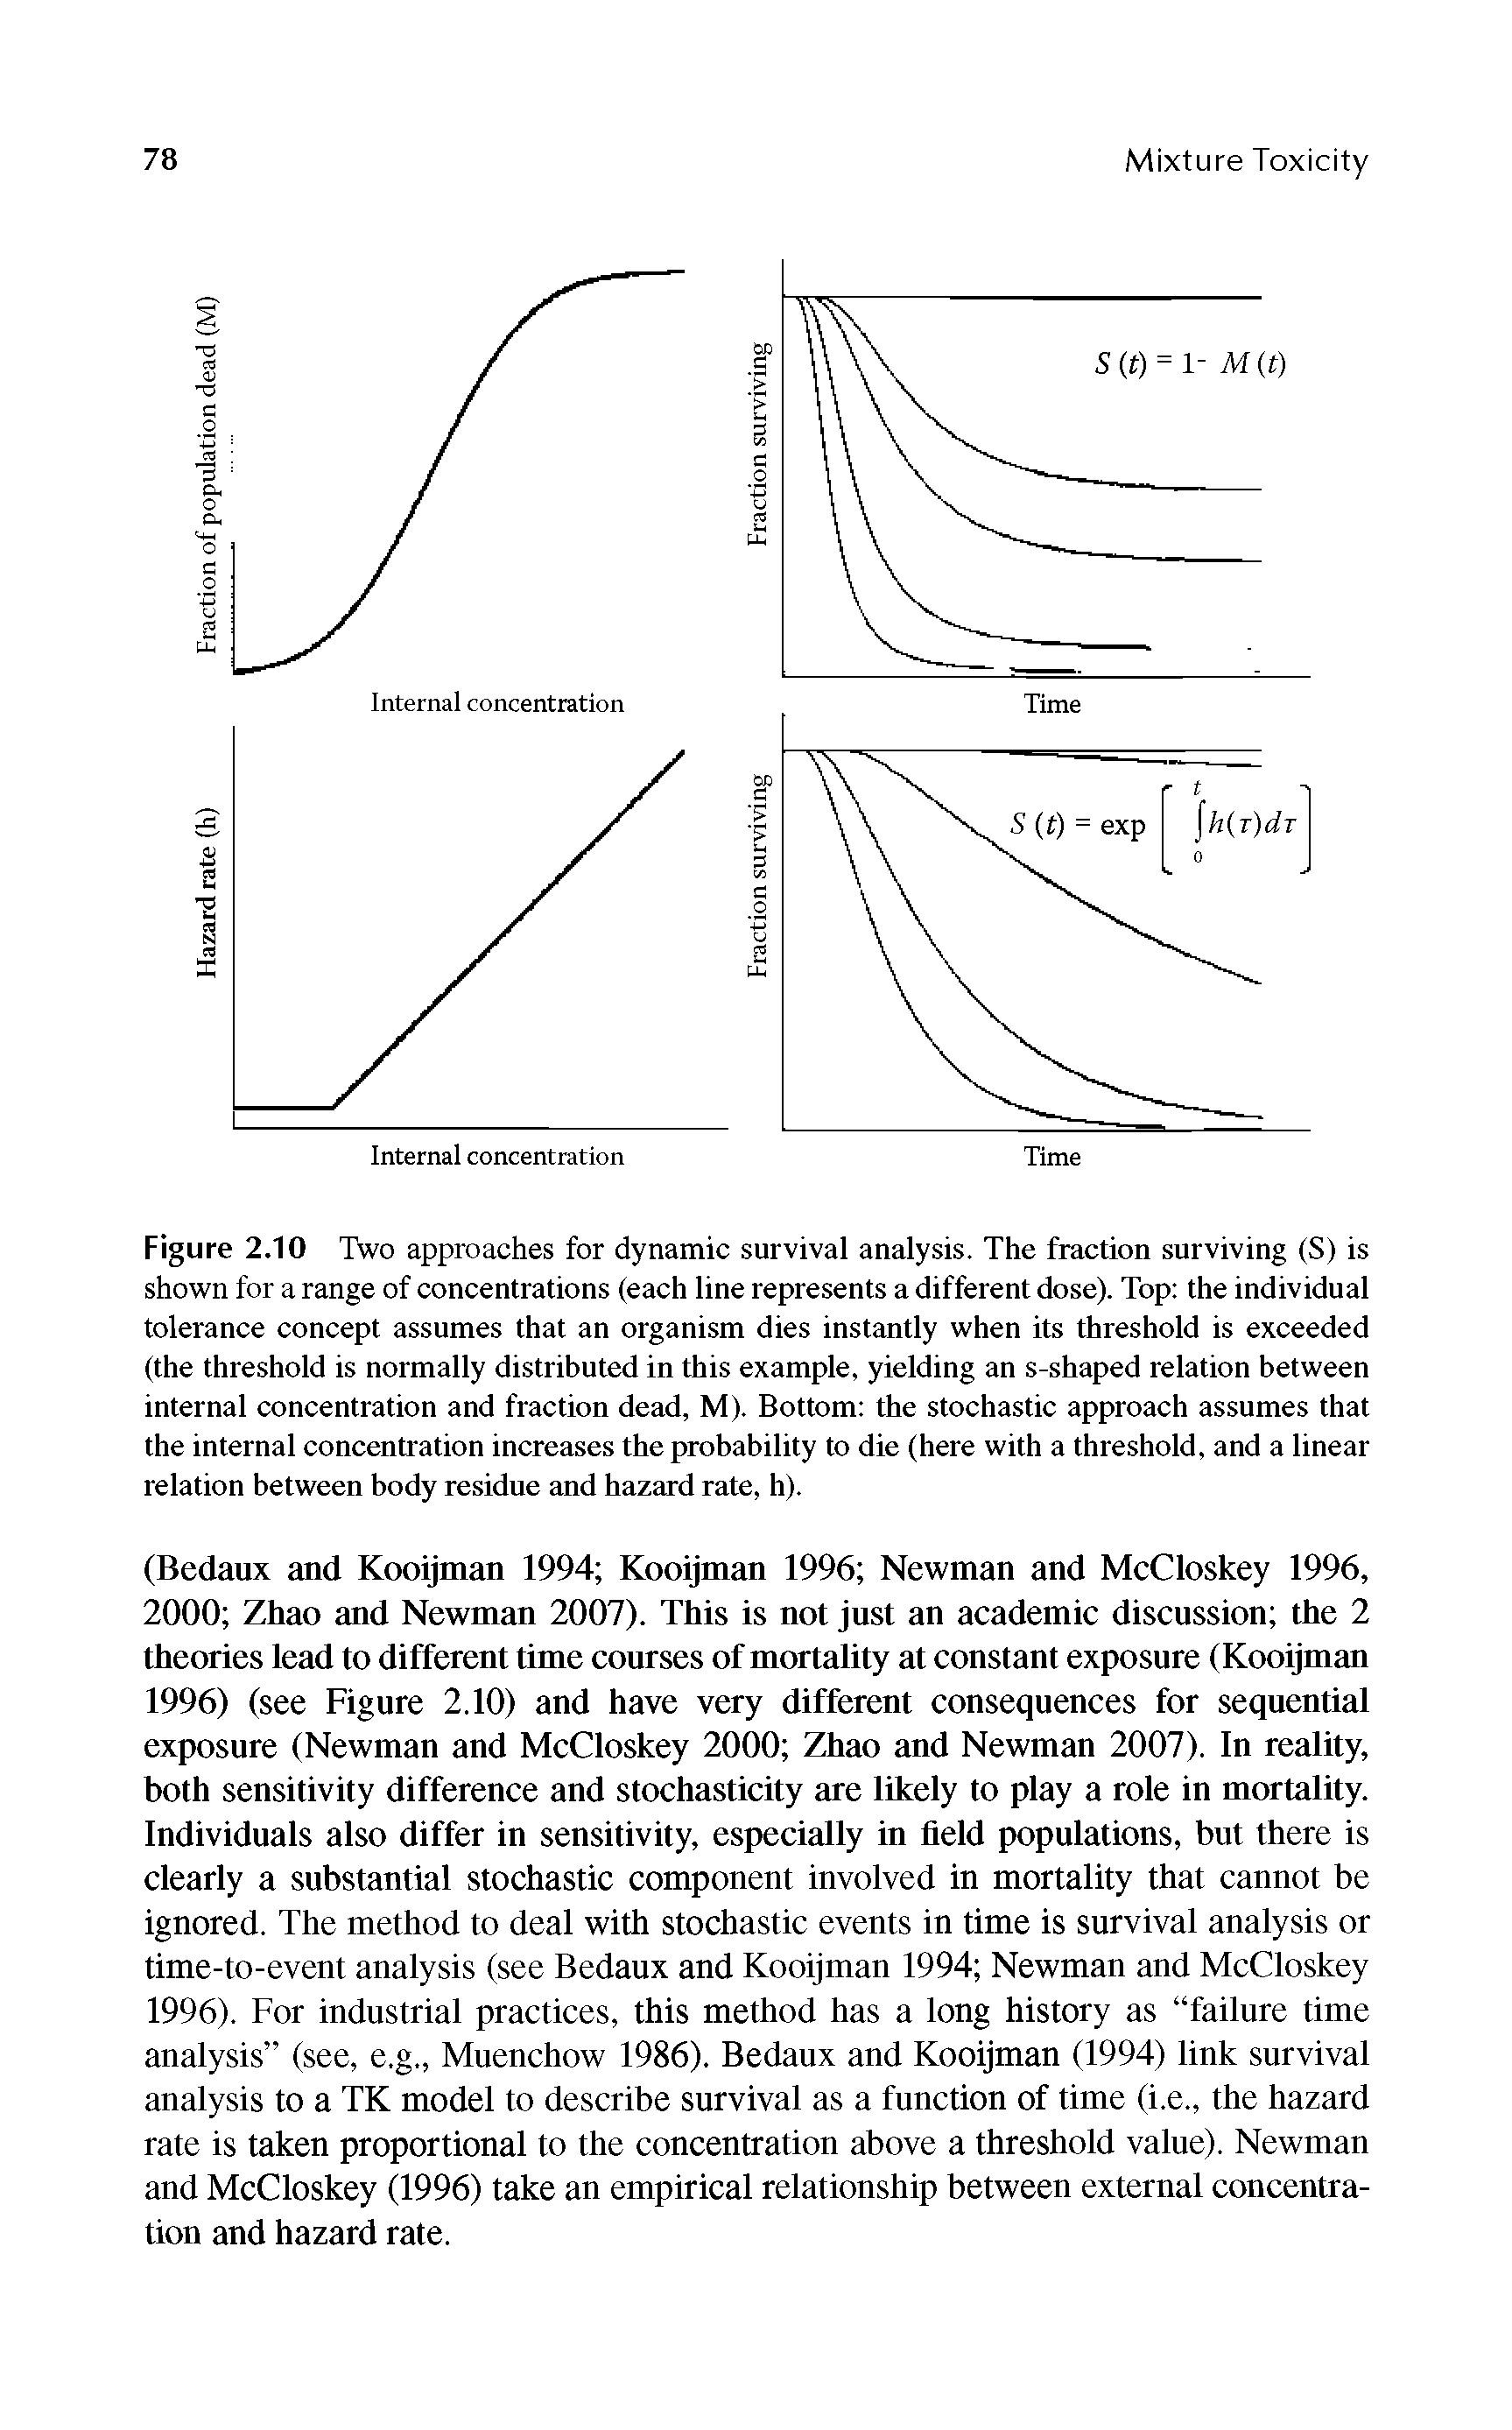 Figure 2.10 Two approaches for dynamic survival analysis. The fraction surviving (S) is shown for a range of concentrations (each line represents a different dose). Top the individual tolerance concept assumes that an organism dies instantly when its threshold is exceeded (the threshold is normally distributed in this example, yielding an s-shaped relation between internal concentration and fraction dead, M). Bottom the stochastic approach assumes that the internal concentration increases the probability to die (here with a threshold, and a linear relation between body residue and hazard rate, h).